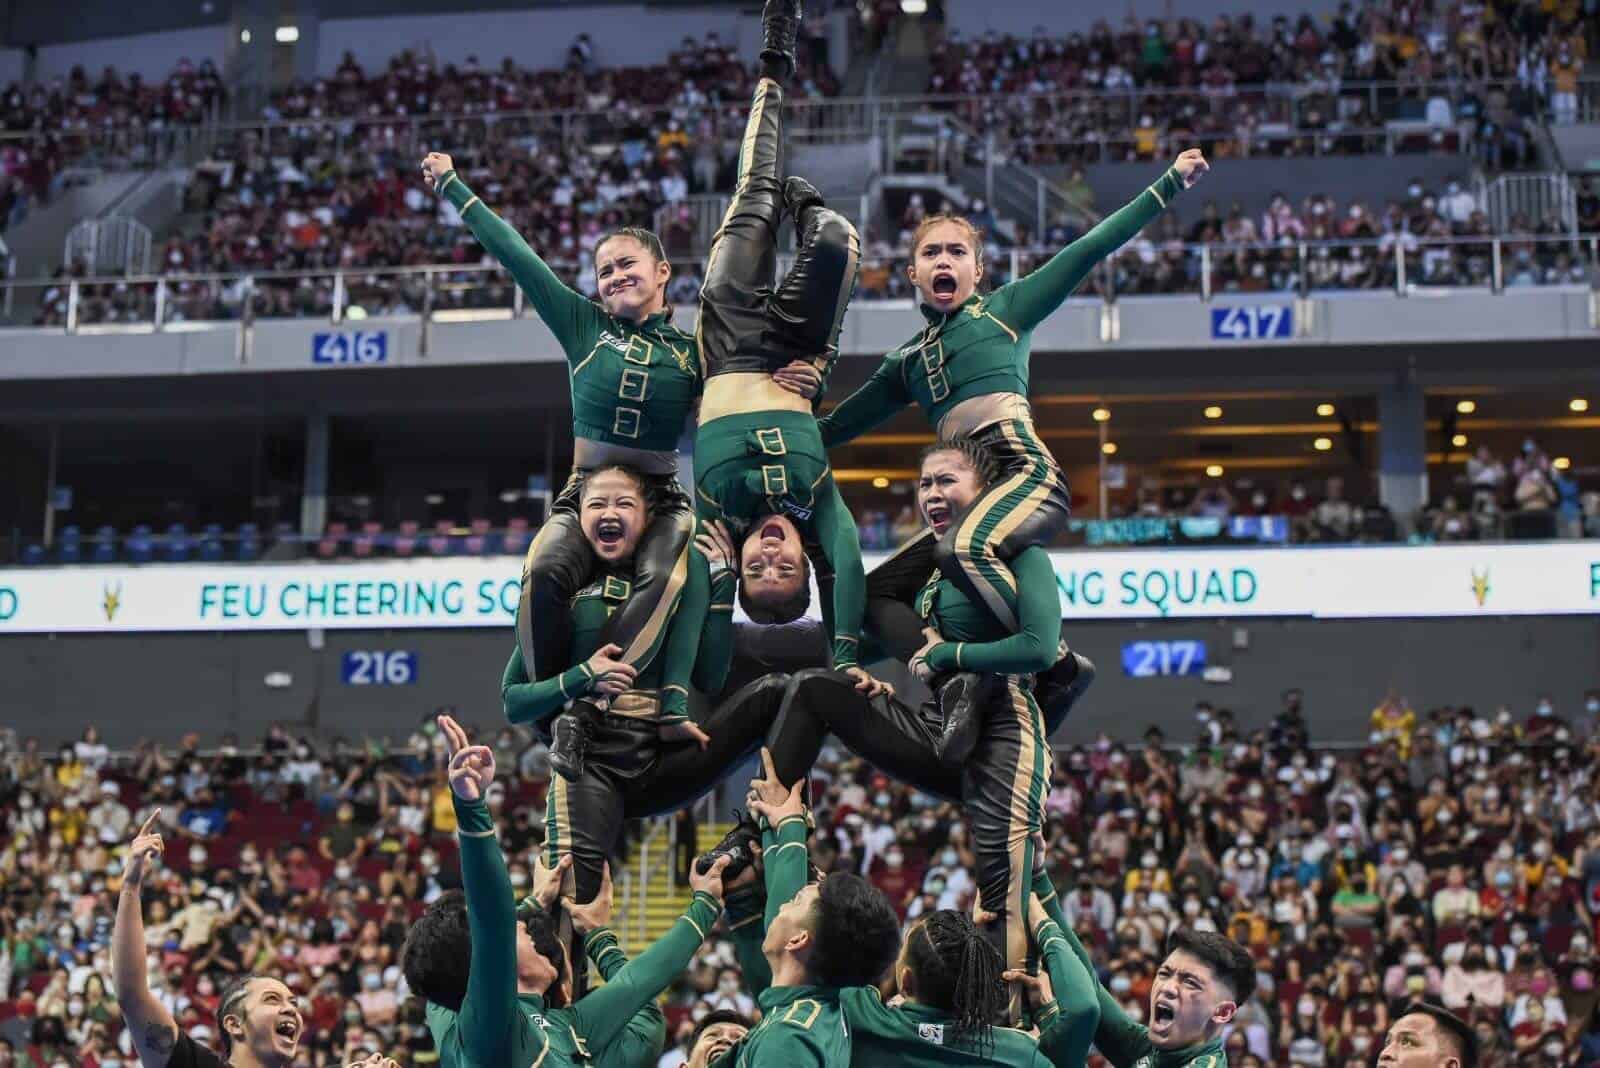 FEU wins UAAP Cheerdance Competition with a group of cheerleaders performing in front of a crowd.